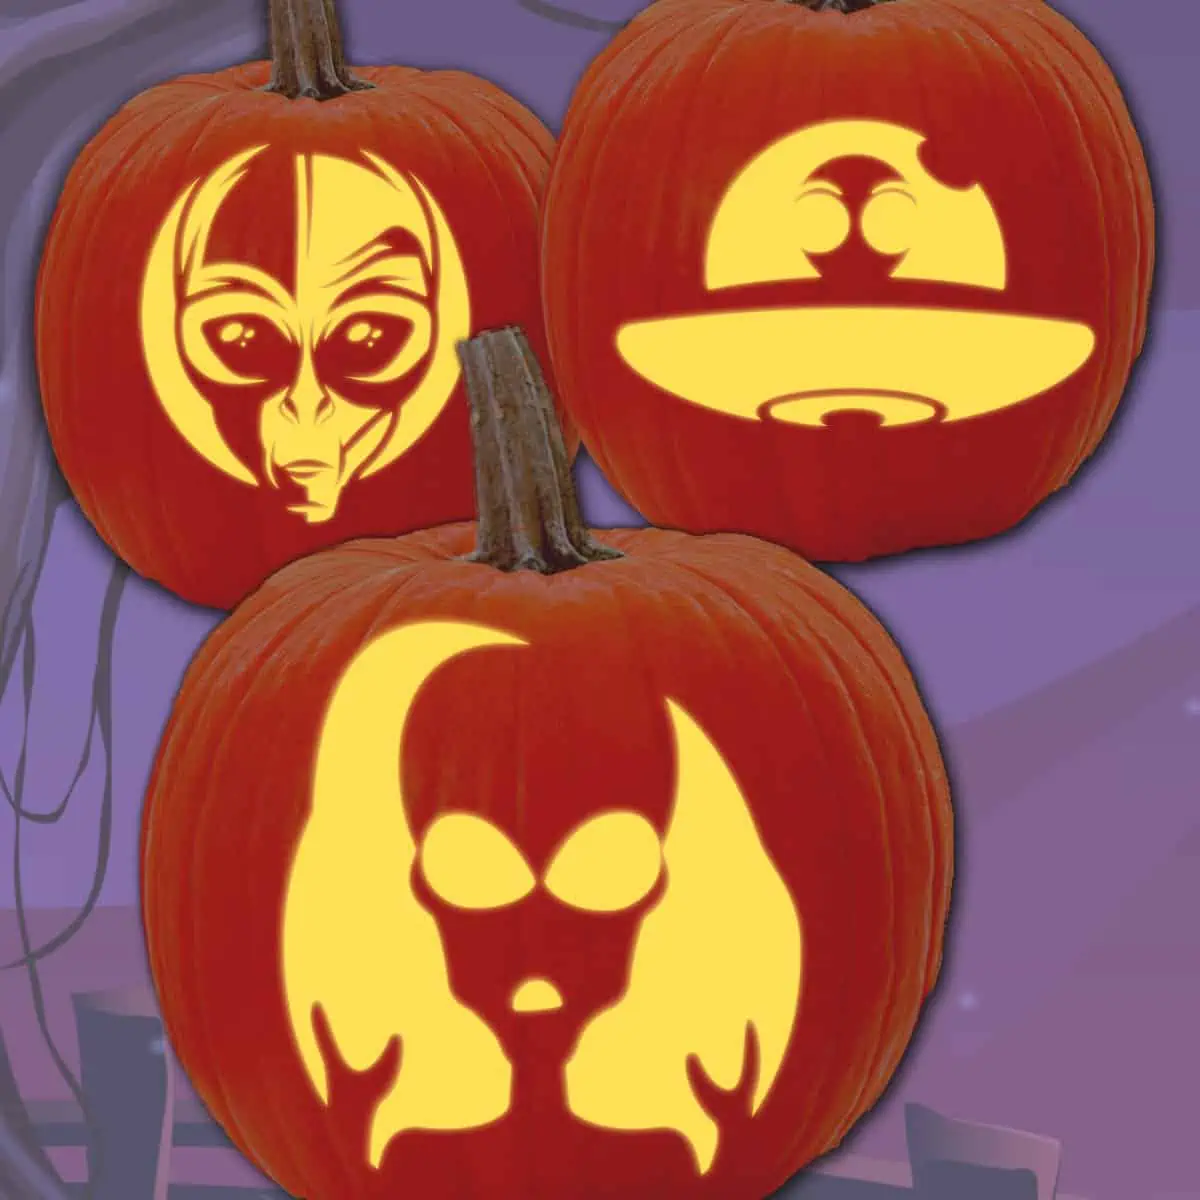 3 pumpkins with glowing carved images of three different aliens that were carved from  pdfs of alien pumpkin carving patterns.